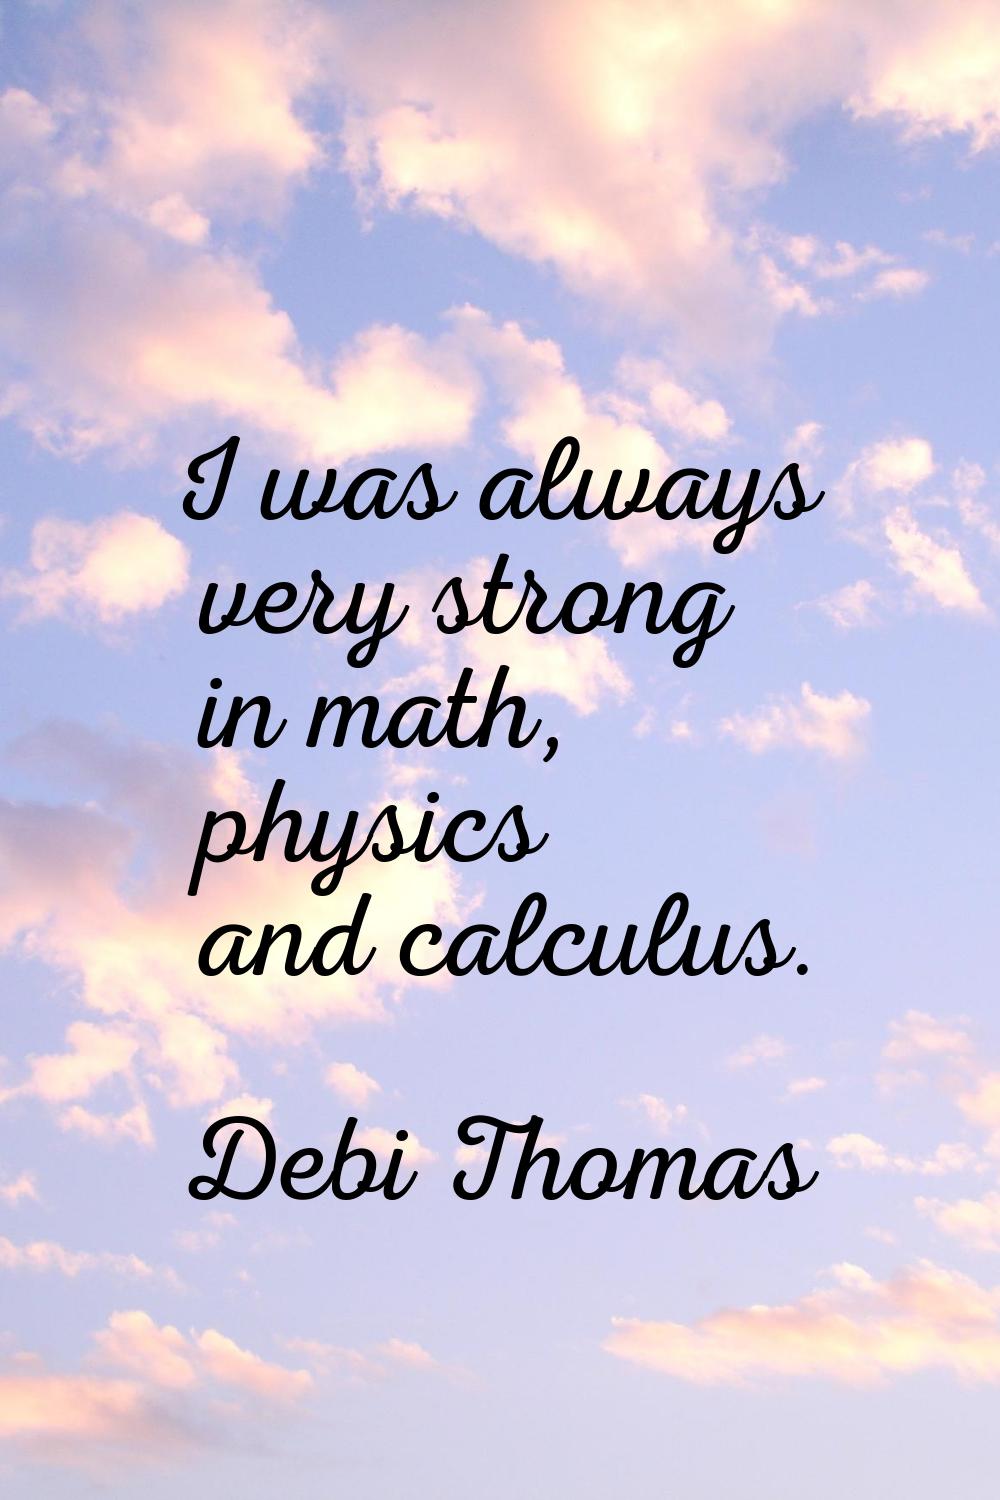 I was always very strong in math, physics and calculus.